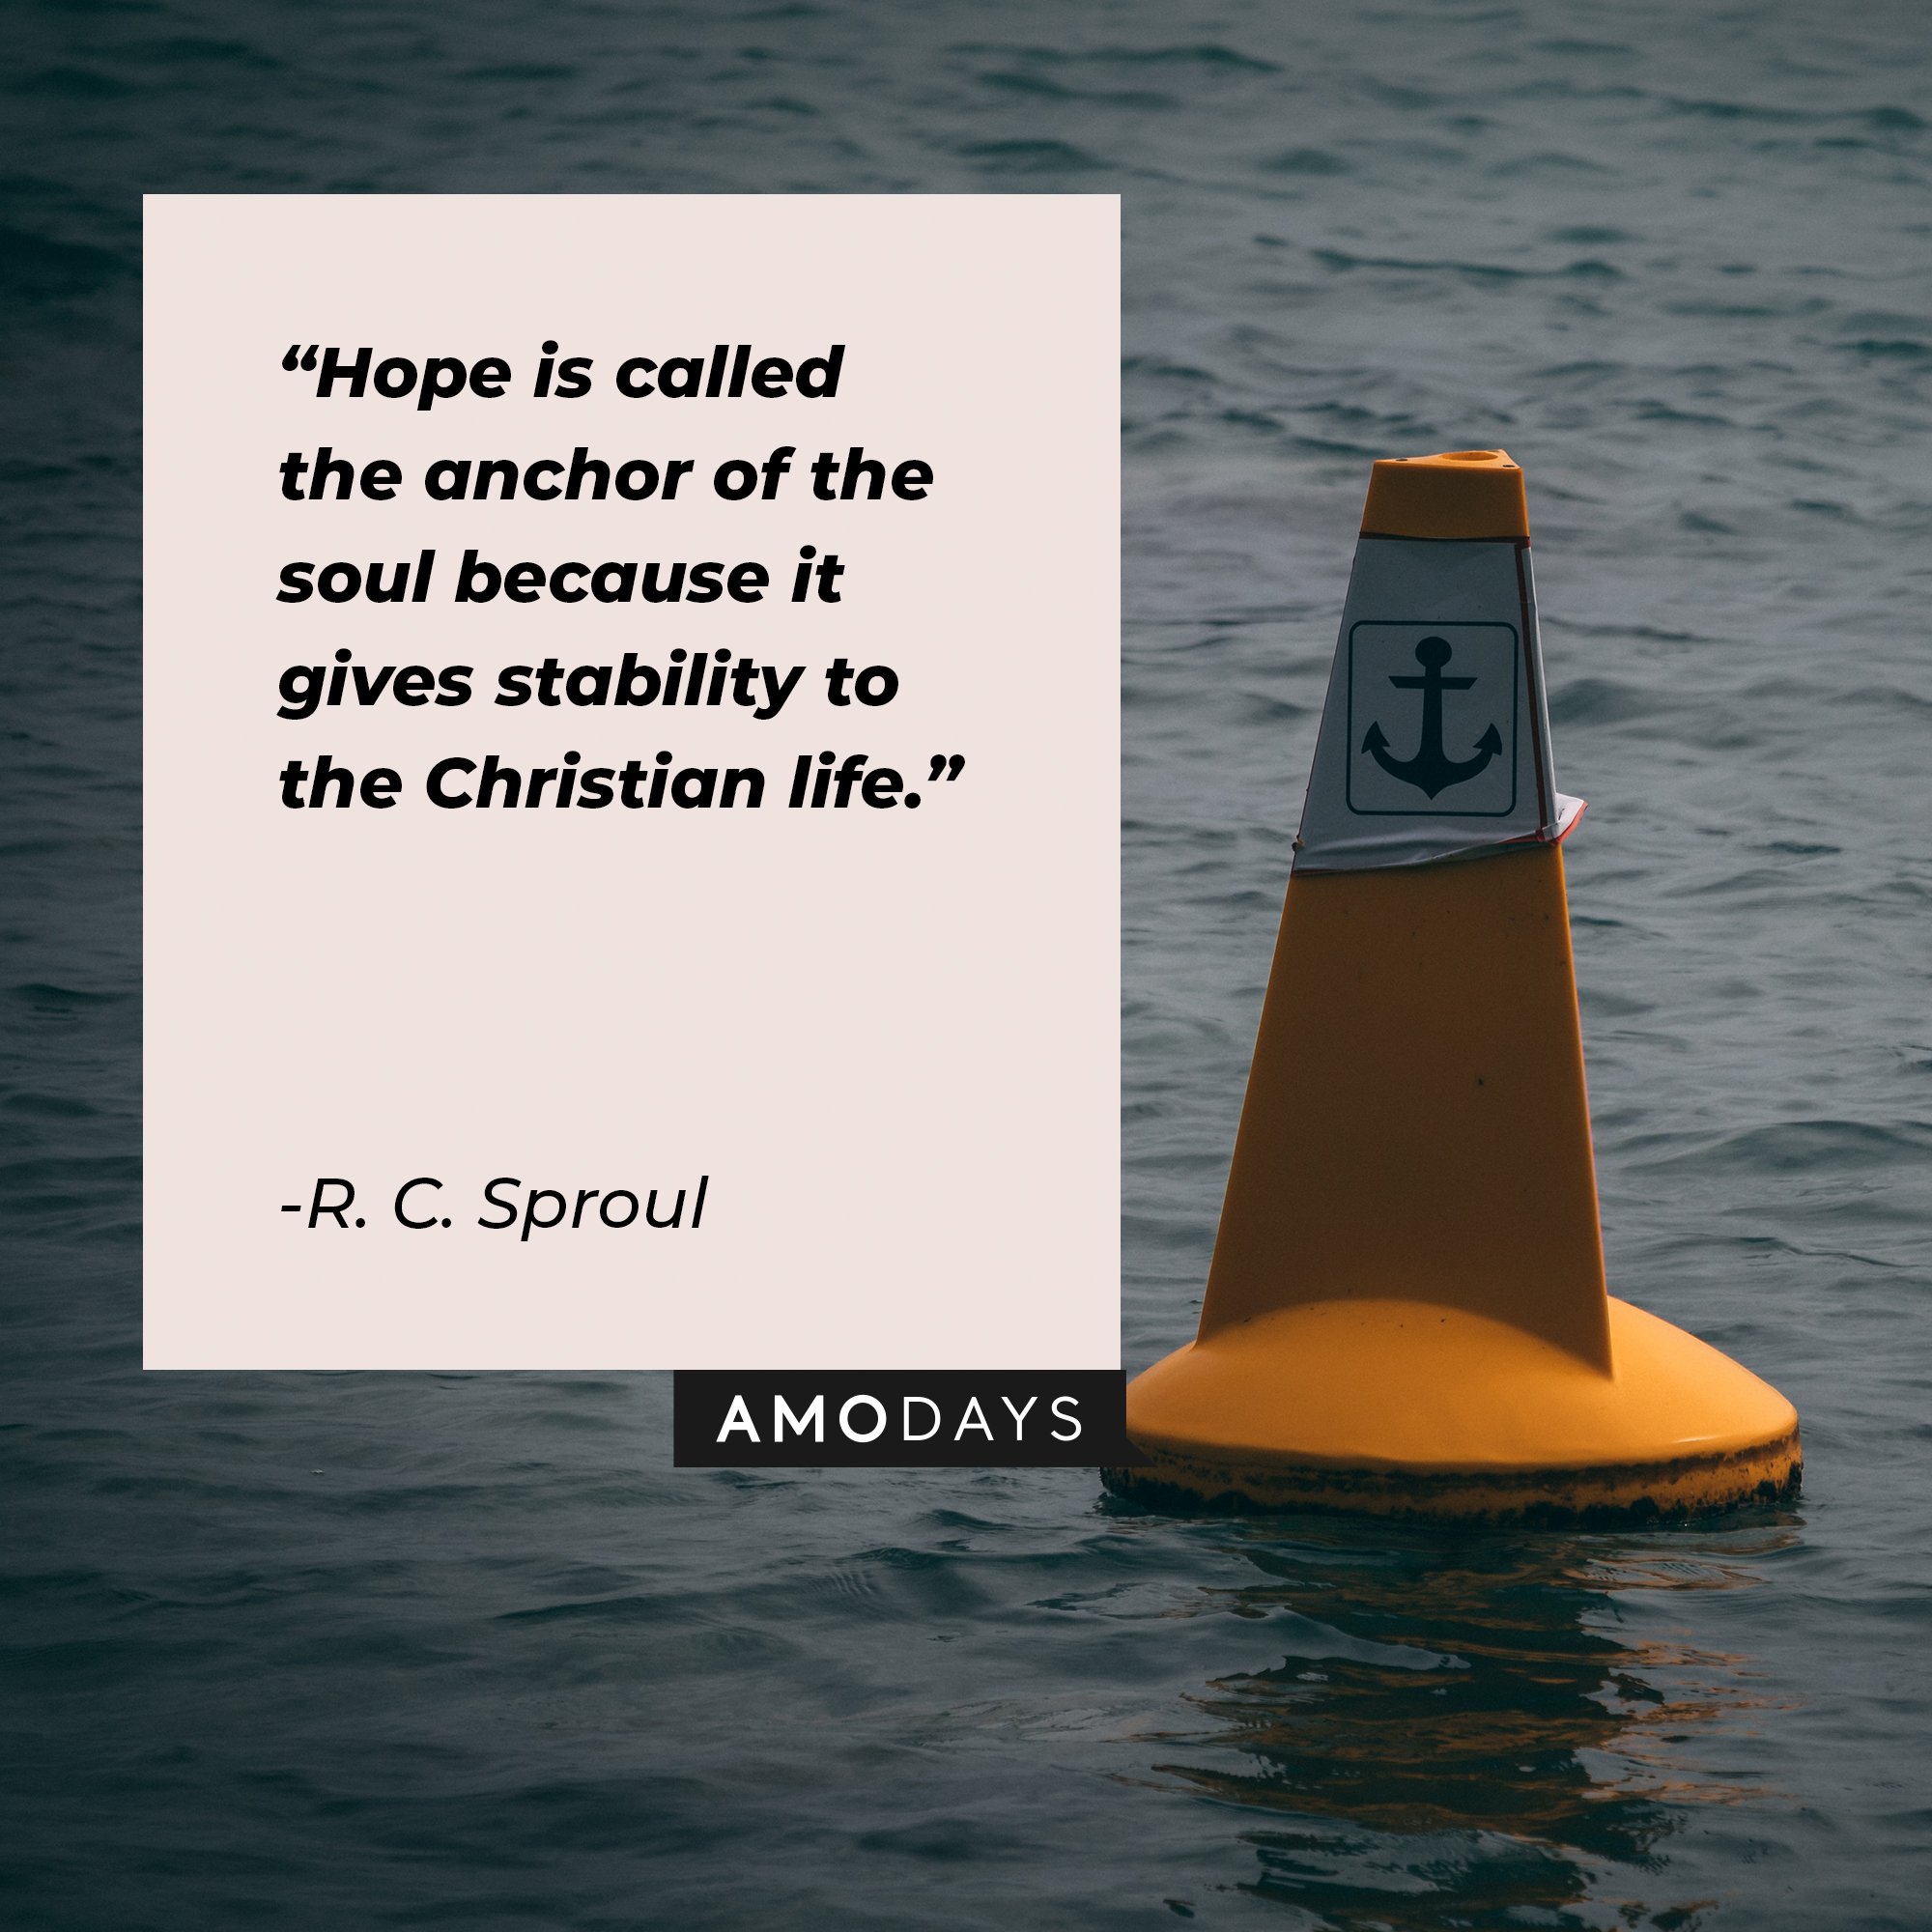 R. C. Sproul's quote: "Hope is called the anchor of the soul because it gives stability to the Christian life." | Image: AmoDays